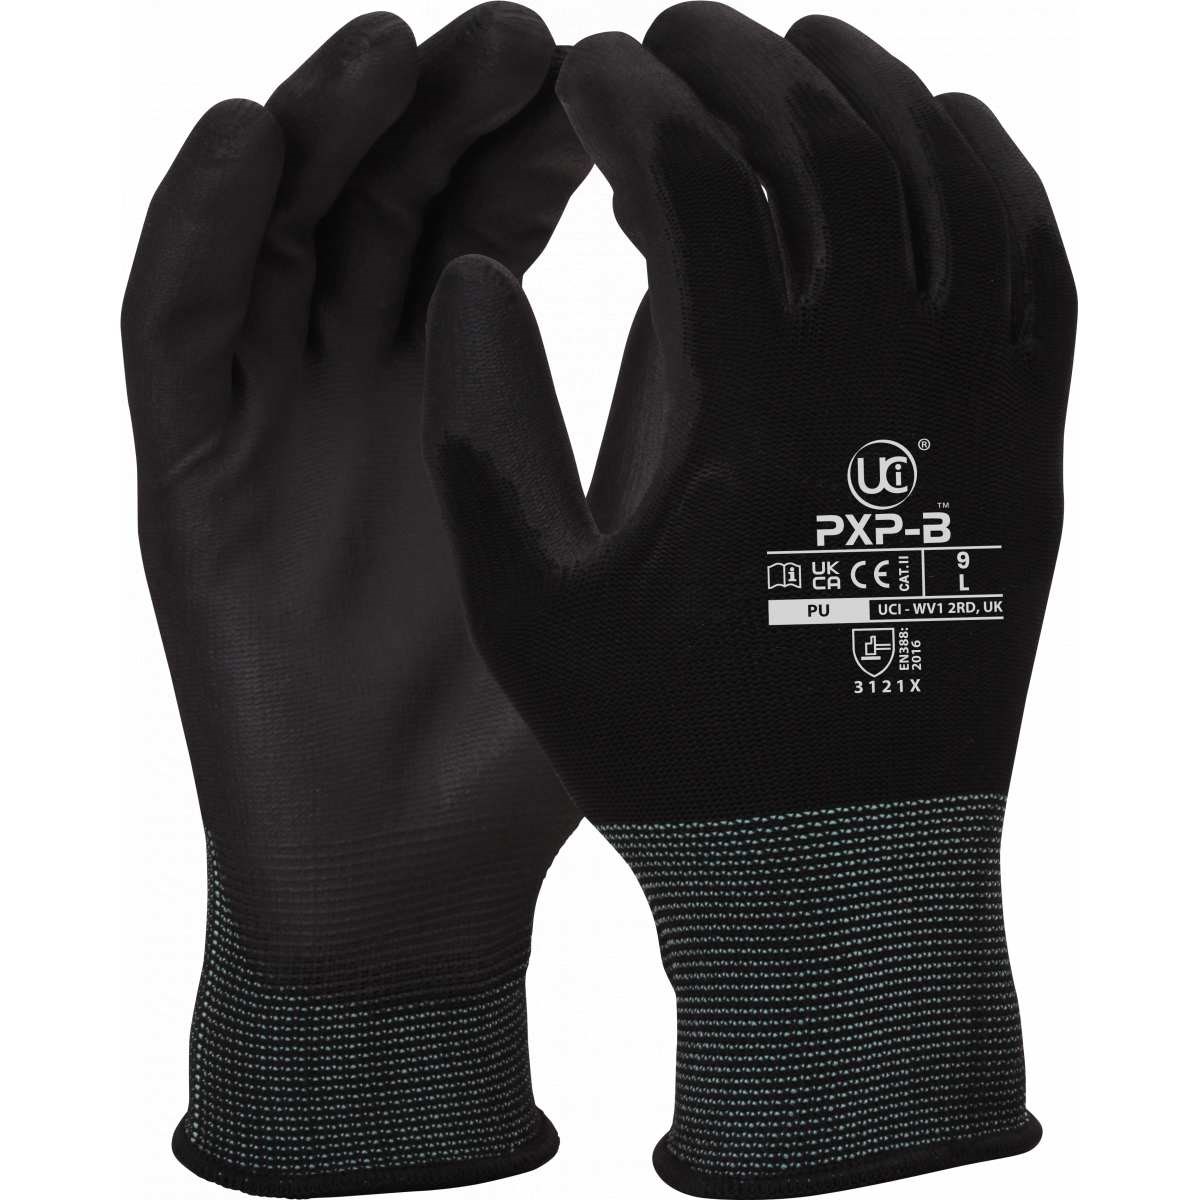 Black PU Palm Coated on Black Liner Precision Work Gloves cheapest